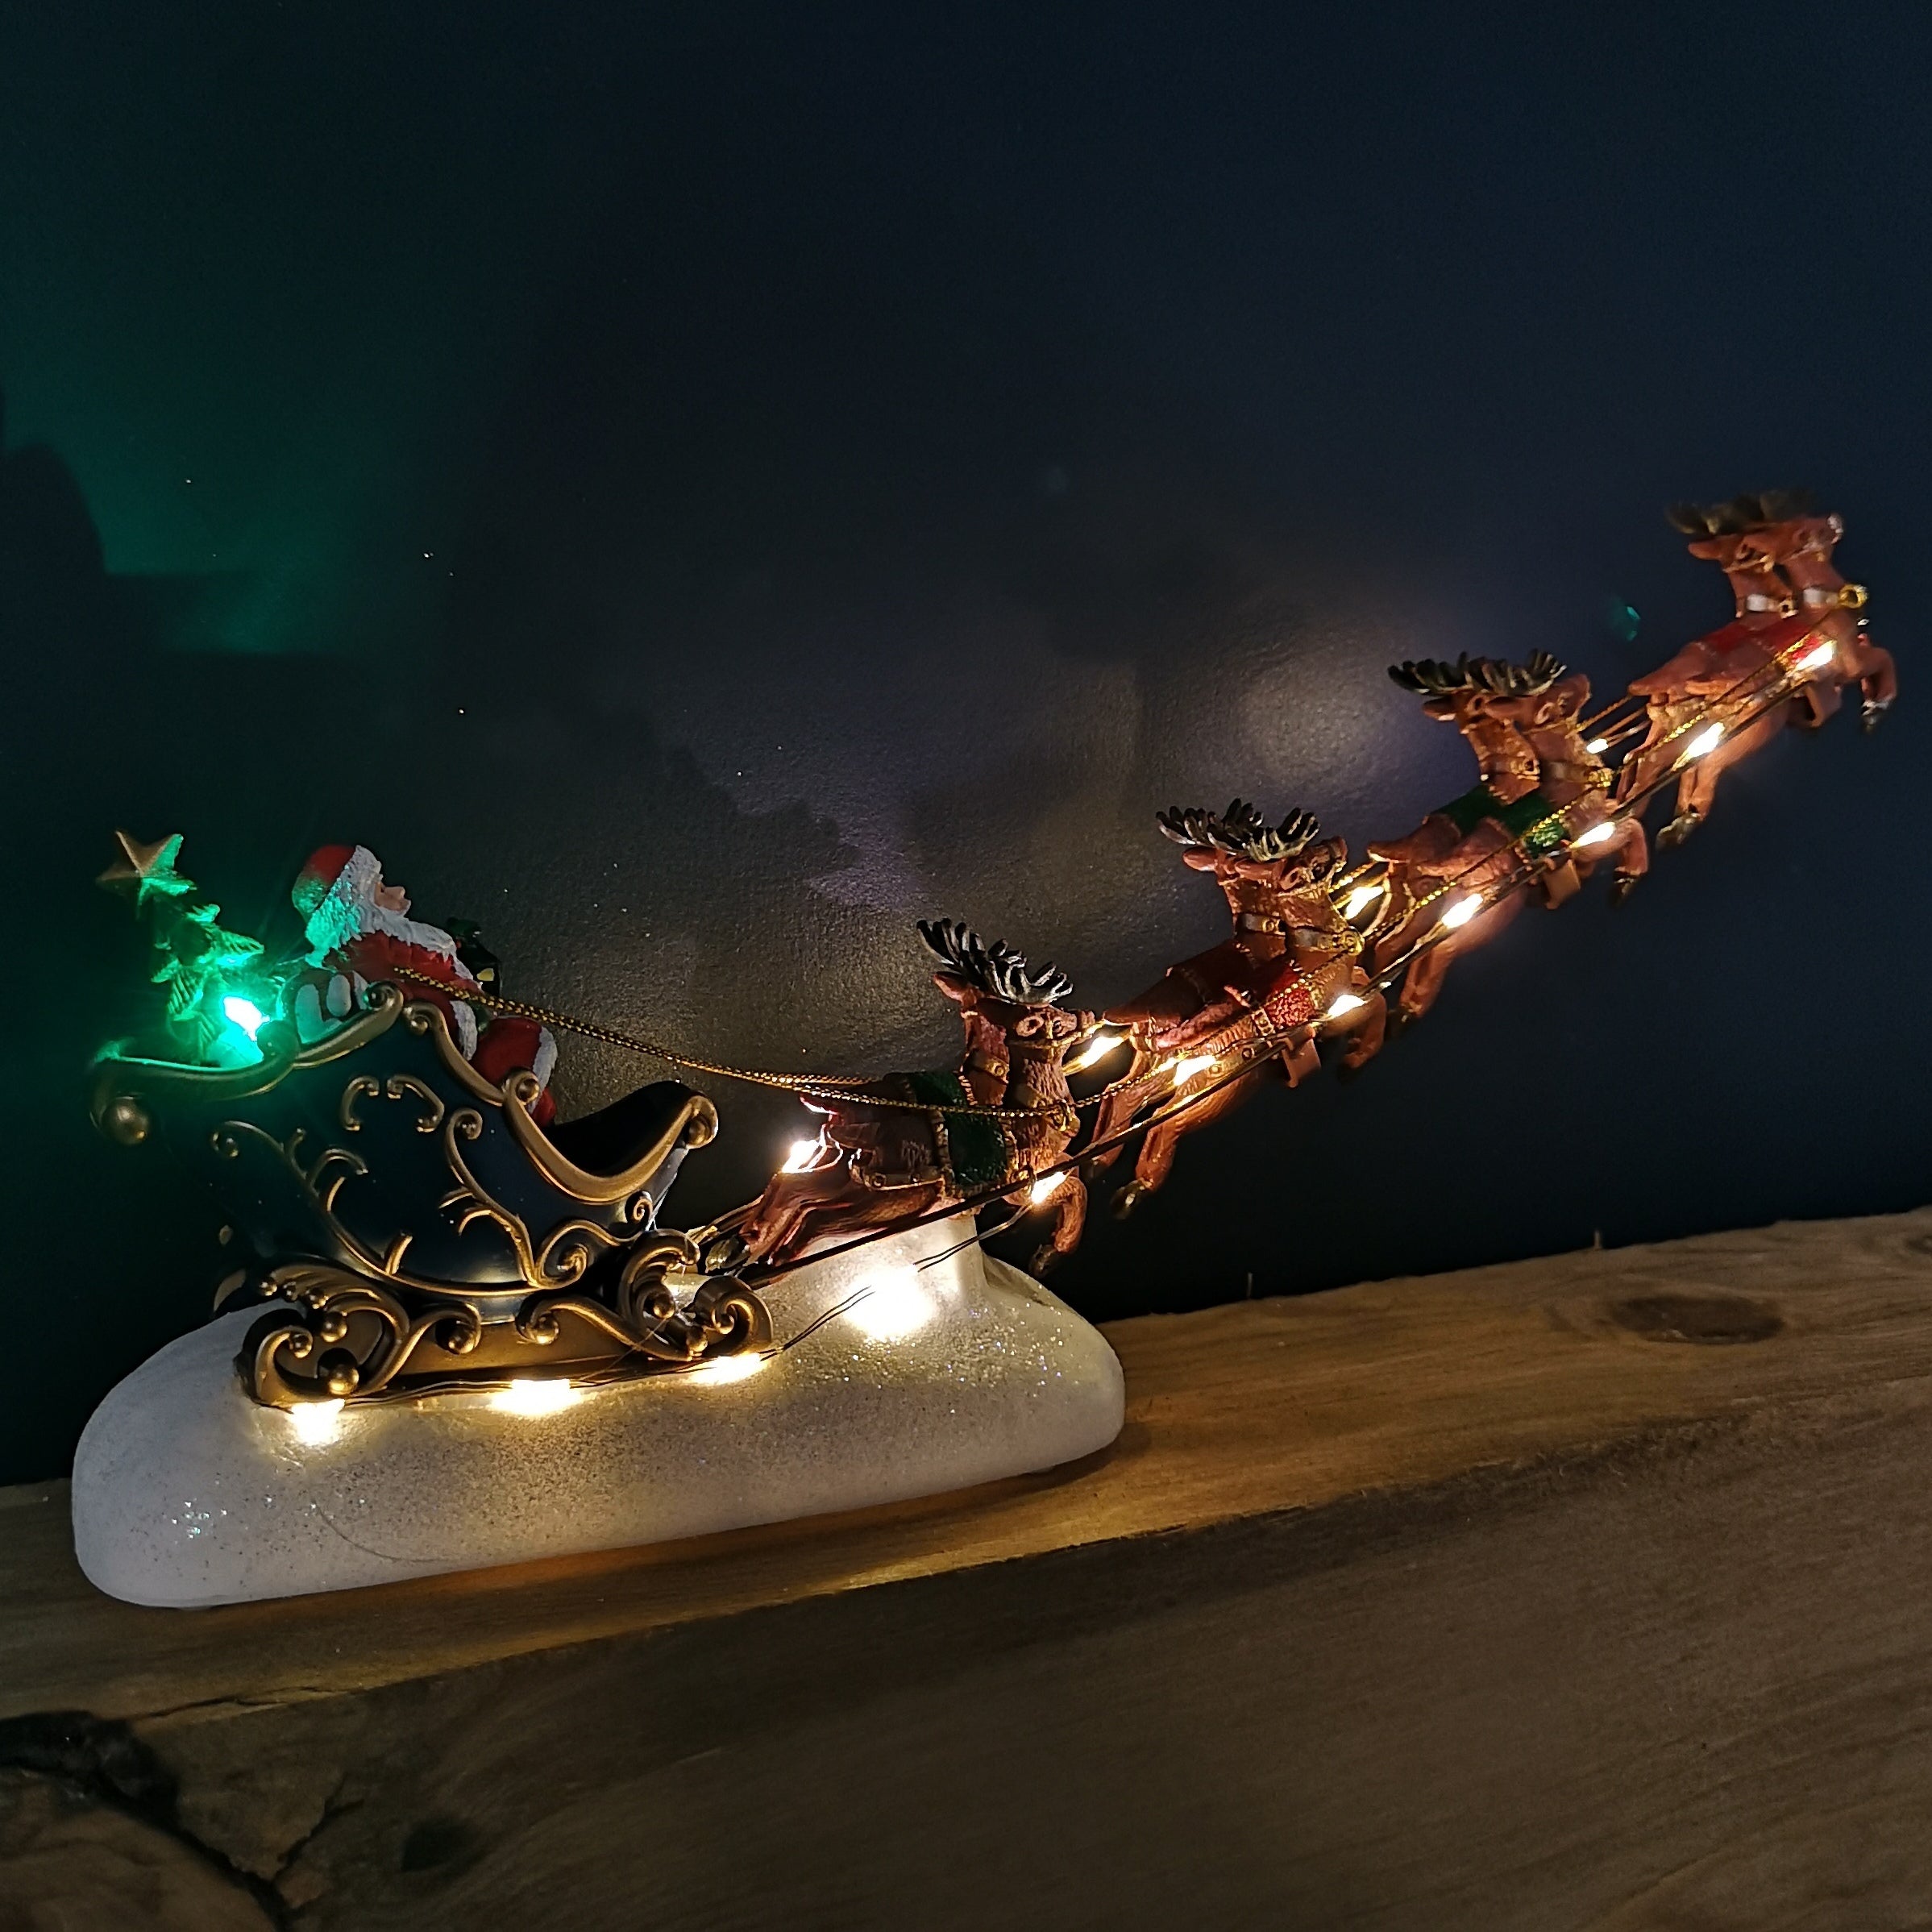 34cm Battery Operated Light up Santa Sleigh with Reindeer Christmas Decoration